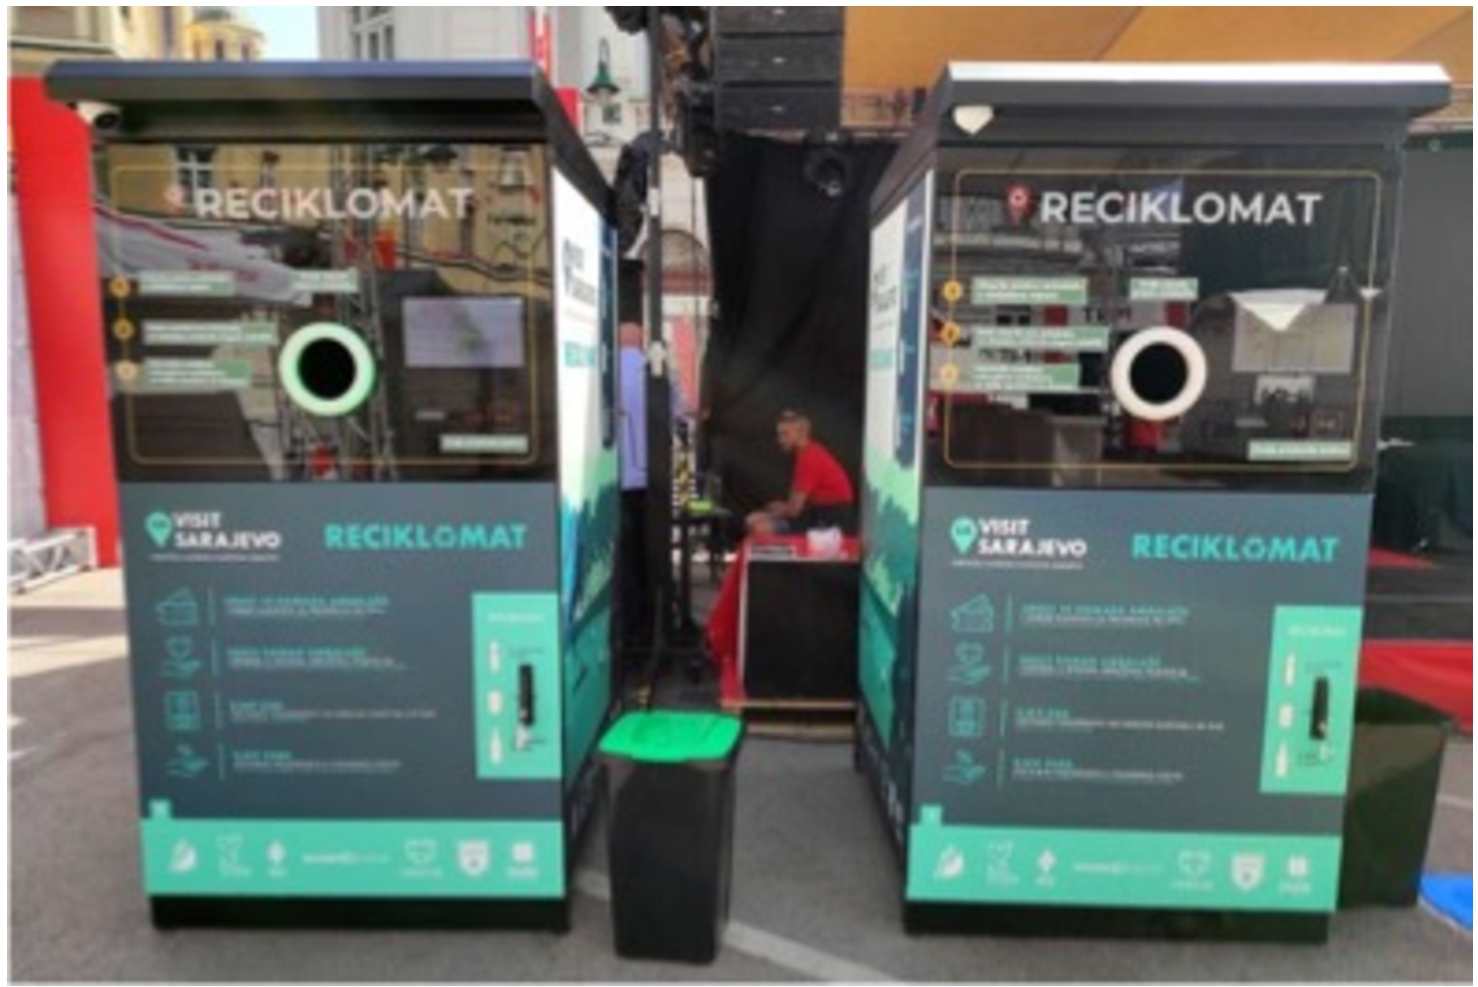 First smart recycling machine in BiH introduced by Sarajevo tourism.